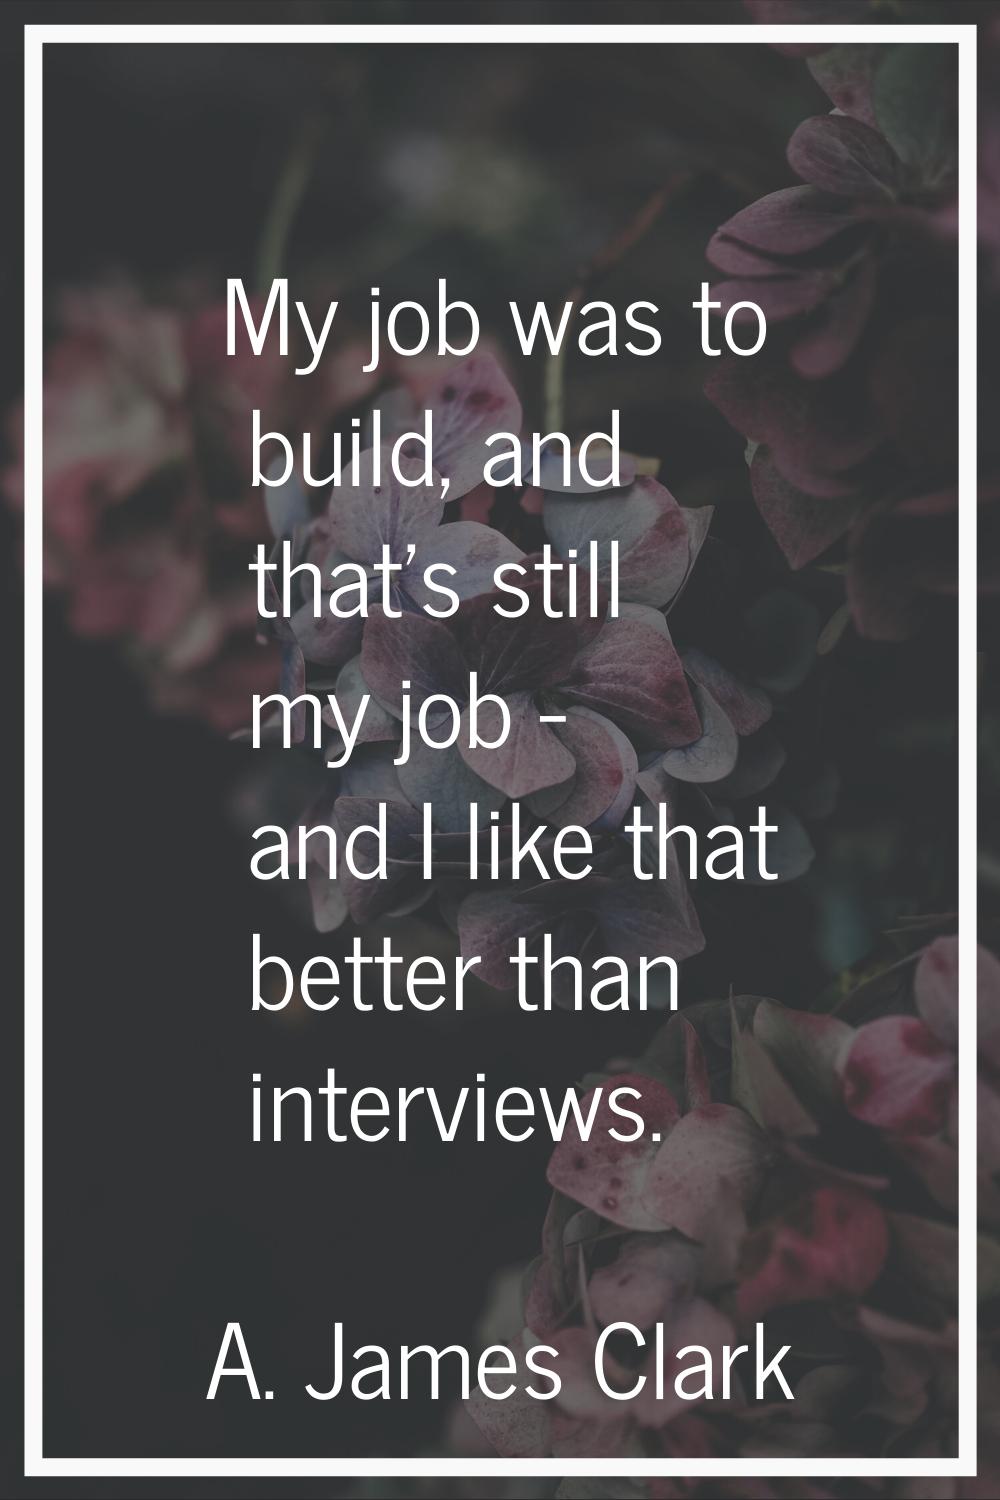 My job was to build, and that's still my job - and I like that better than interviews.